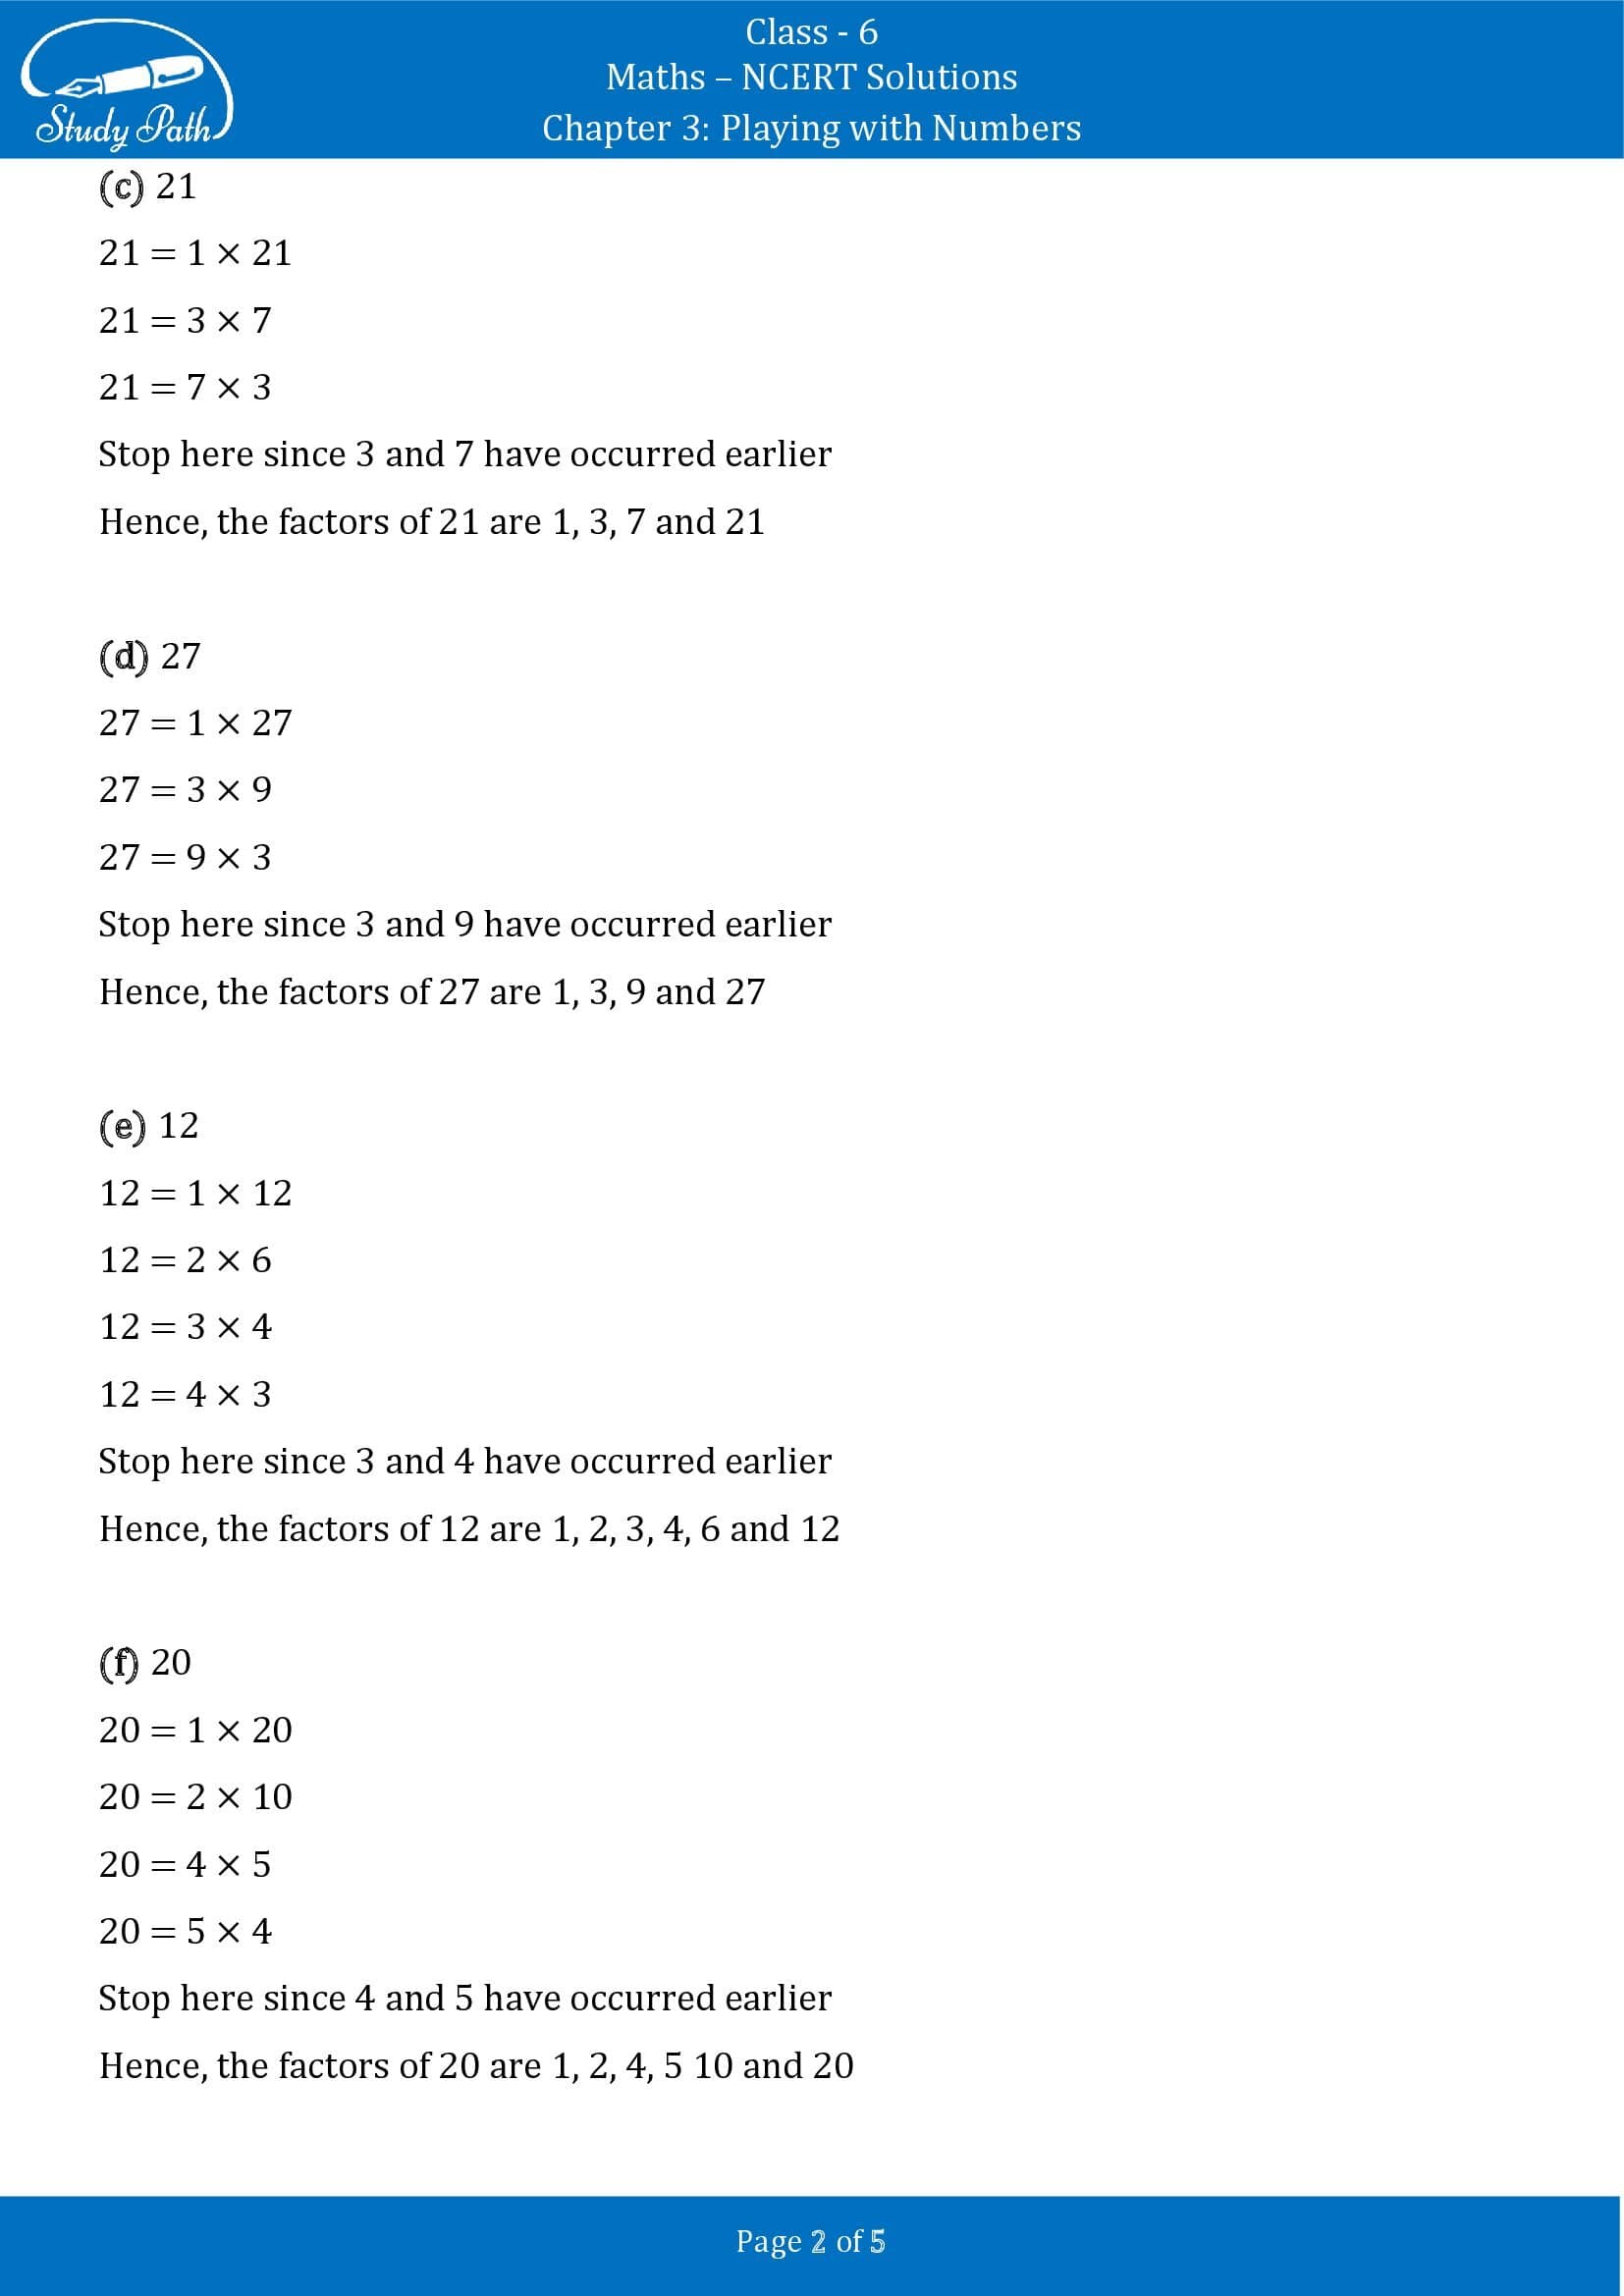 NCERT Solutions for Class 6 Maths Chapter 3 Playing with Numbers Exercise 3.1 00002